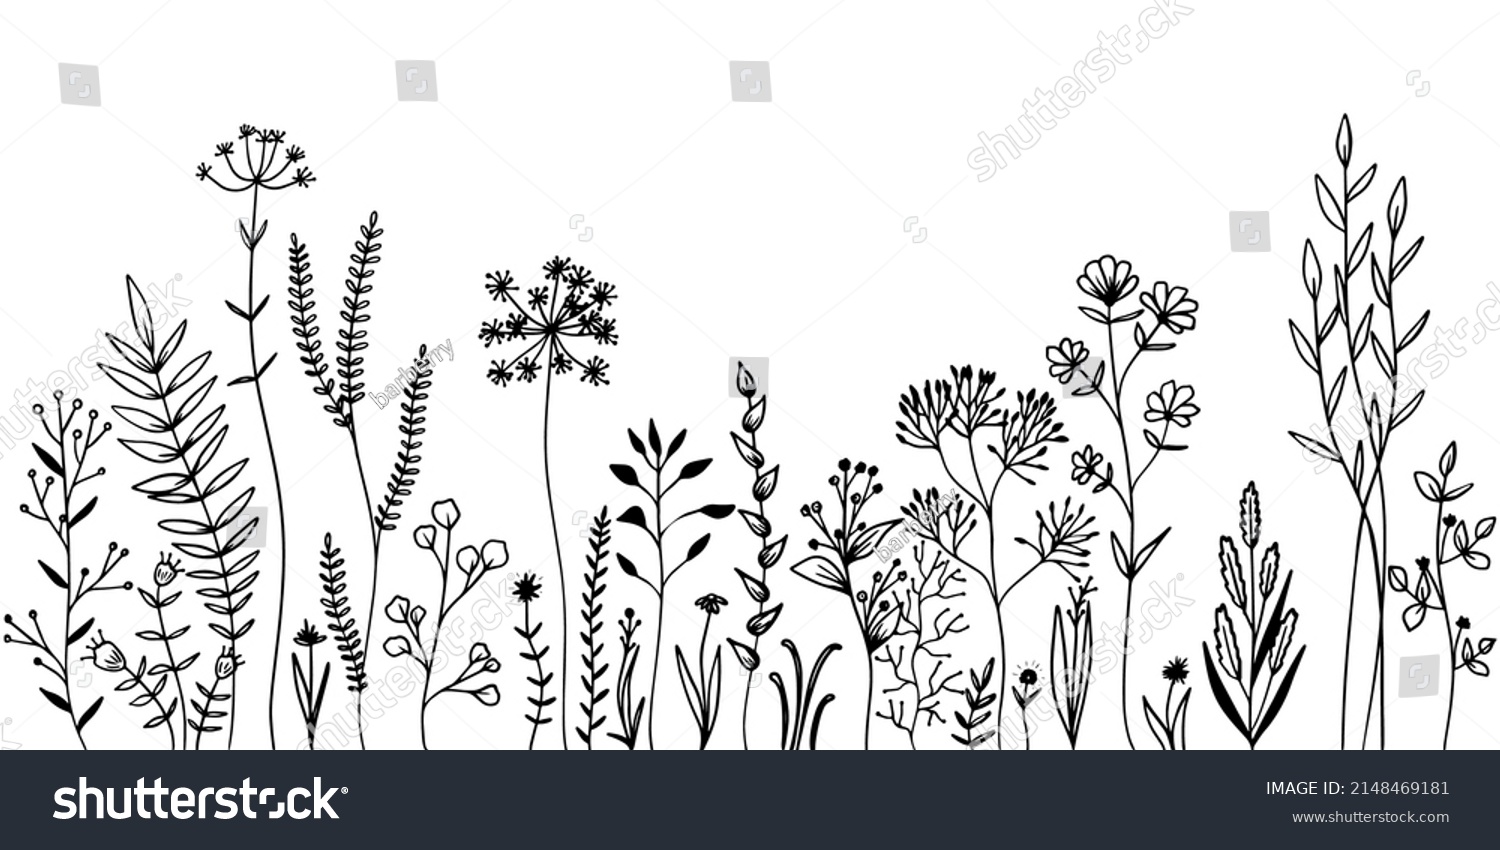 Set of wild meadow herbs and flowers. Hand drawn black vector illustration. Isolated elements for design. #2148469181